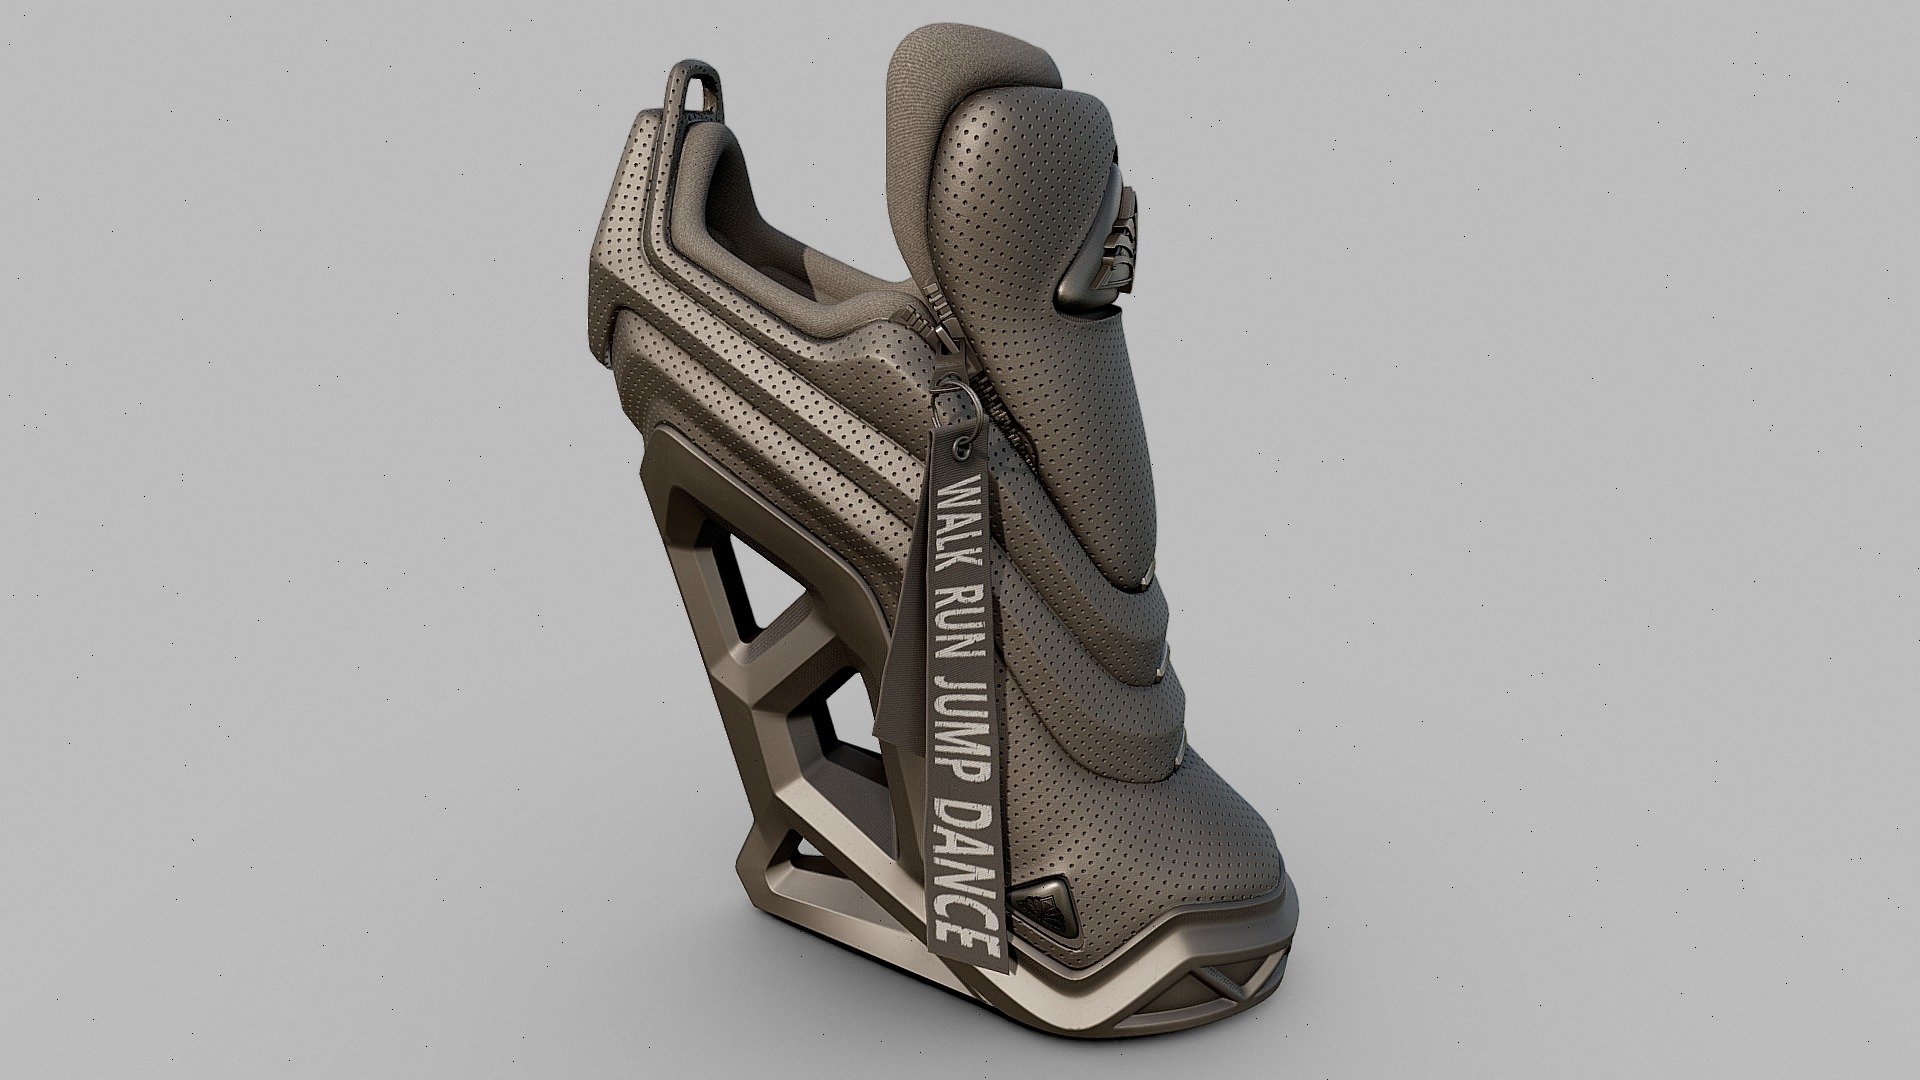 This model is perfect for character creation, visualization, and a variety of other purposes. The boot was designed and sculpted with ZBrush and textured with Substance Painter for a realistic look and feel.The design exudes innovation and luxury, radiating an air of confidence and sophistication in street wear! Pumping the boot with a pump on the front will inflate air cushions around the feet, providing an unparalleled level of comfort. Thanks to a special sole, the platform provides a one-of-a-kind walking experience by reducing the sound of each step to the whisper of a falling feather! And the special sensors will gather all the necessary data to optimize your wellness experience.

BEHANCE presentation https://www.behance.net/gallery/178998135/COMFY-HEELS-CRYPTO

Unreal Engine 5.1.1 version with a mirrored pair of heels included!

See the versions:
(BLK&amp;GLD) https://skfb.ly/oDVMI
(CAMO) https://skfb.ly/oE77n
(WHT&amp;GLD) https://skfb.ly/oFvZB
(GLD) https://skfb.ly/oJPCr
(BLK &amp; WHT) https://skfb.ly/oKMFx - Comfy Heel (BLK) - Buy Royalty Free 3D model by Bartholomew Koziel (@bkoziel) 3d model